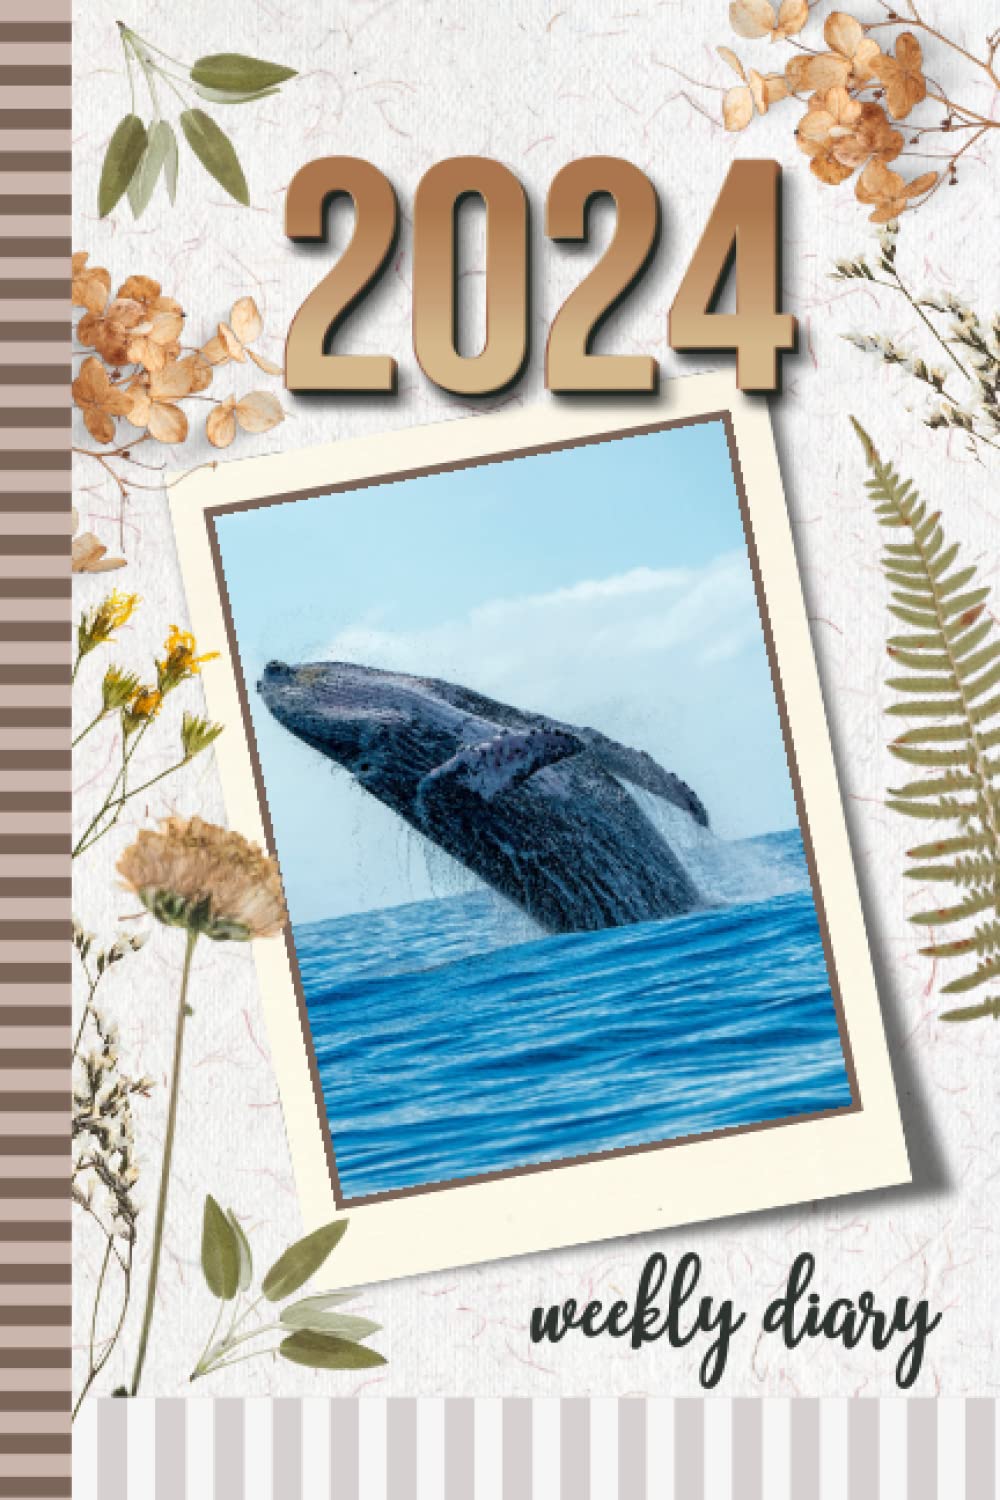 2024 Weekly Diary: 6x9 Dated Personal Organizer / Daily Scheduler With Checklist - To Do List - Note Section - Habit Tracker / Organizing Gift / Whale in Ocean - Rustic Art Cover